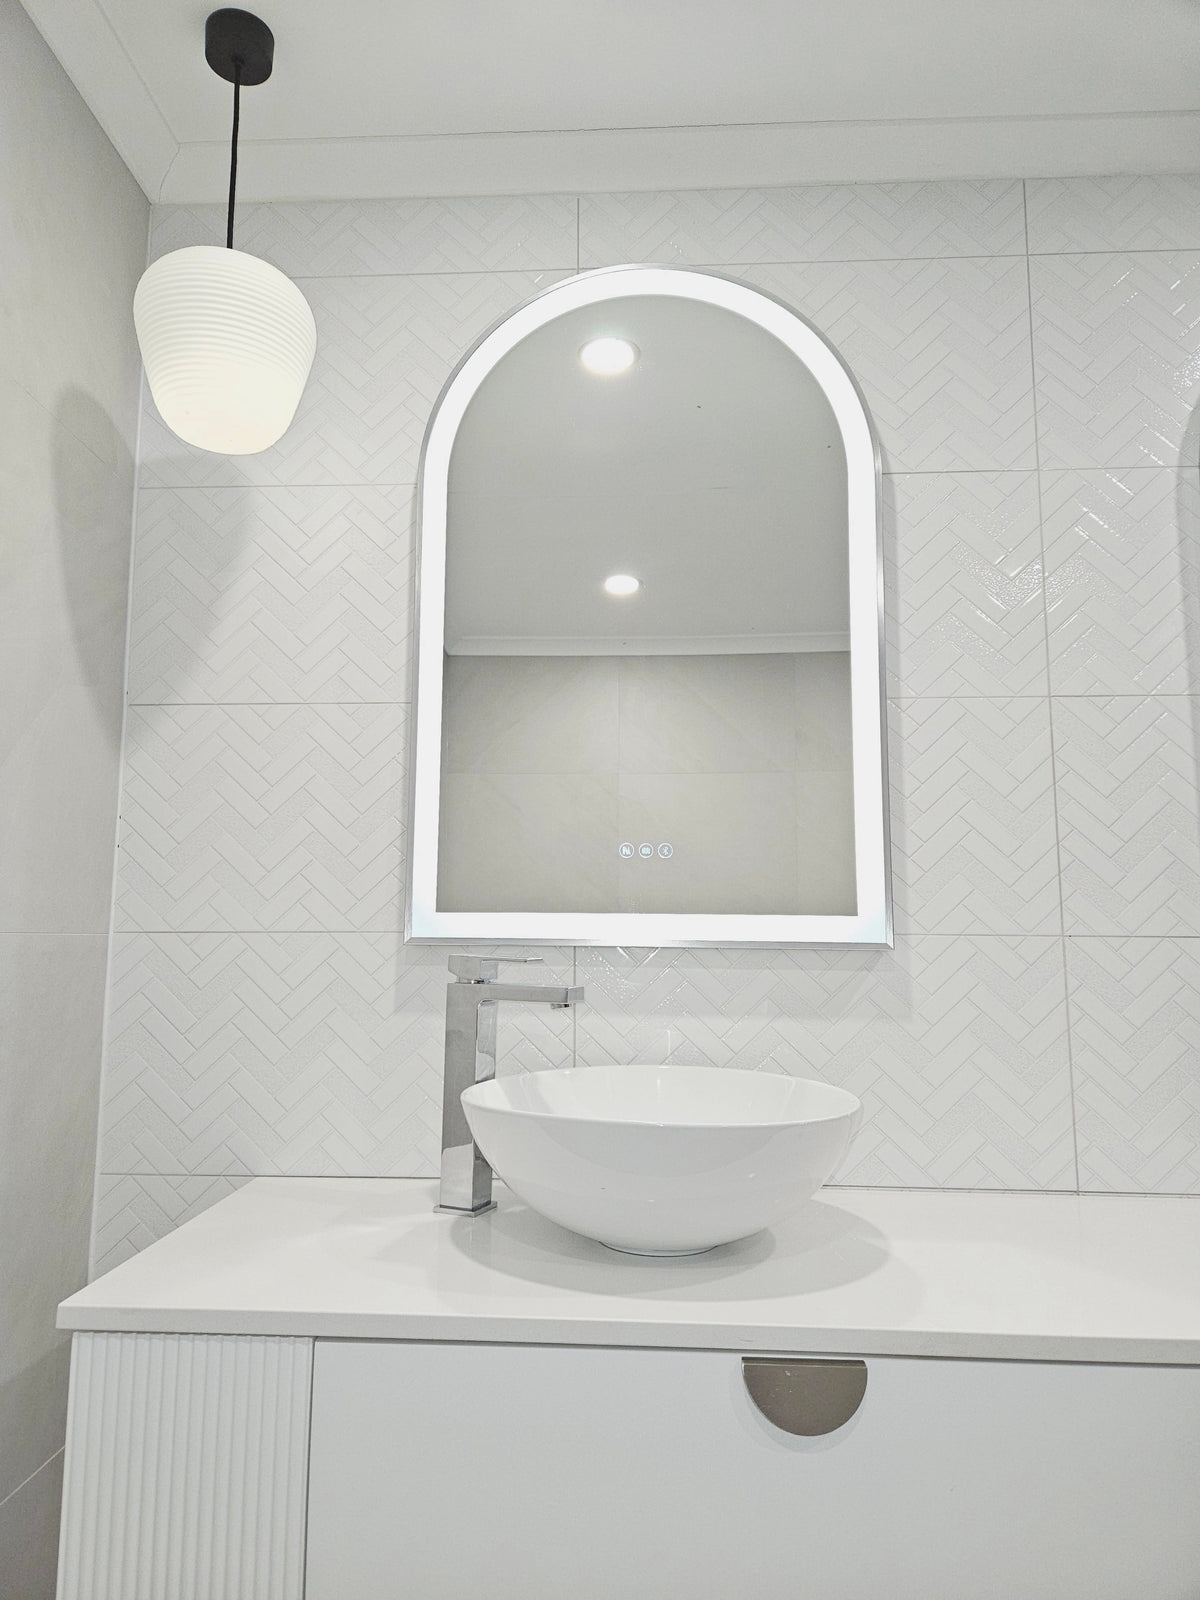 Powder Room with Arch-Shaped Smart LED Mirror, Pendant Light, White and Grey Wall, Vanity Cabinets